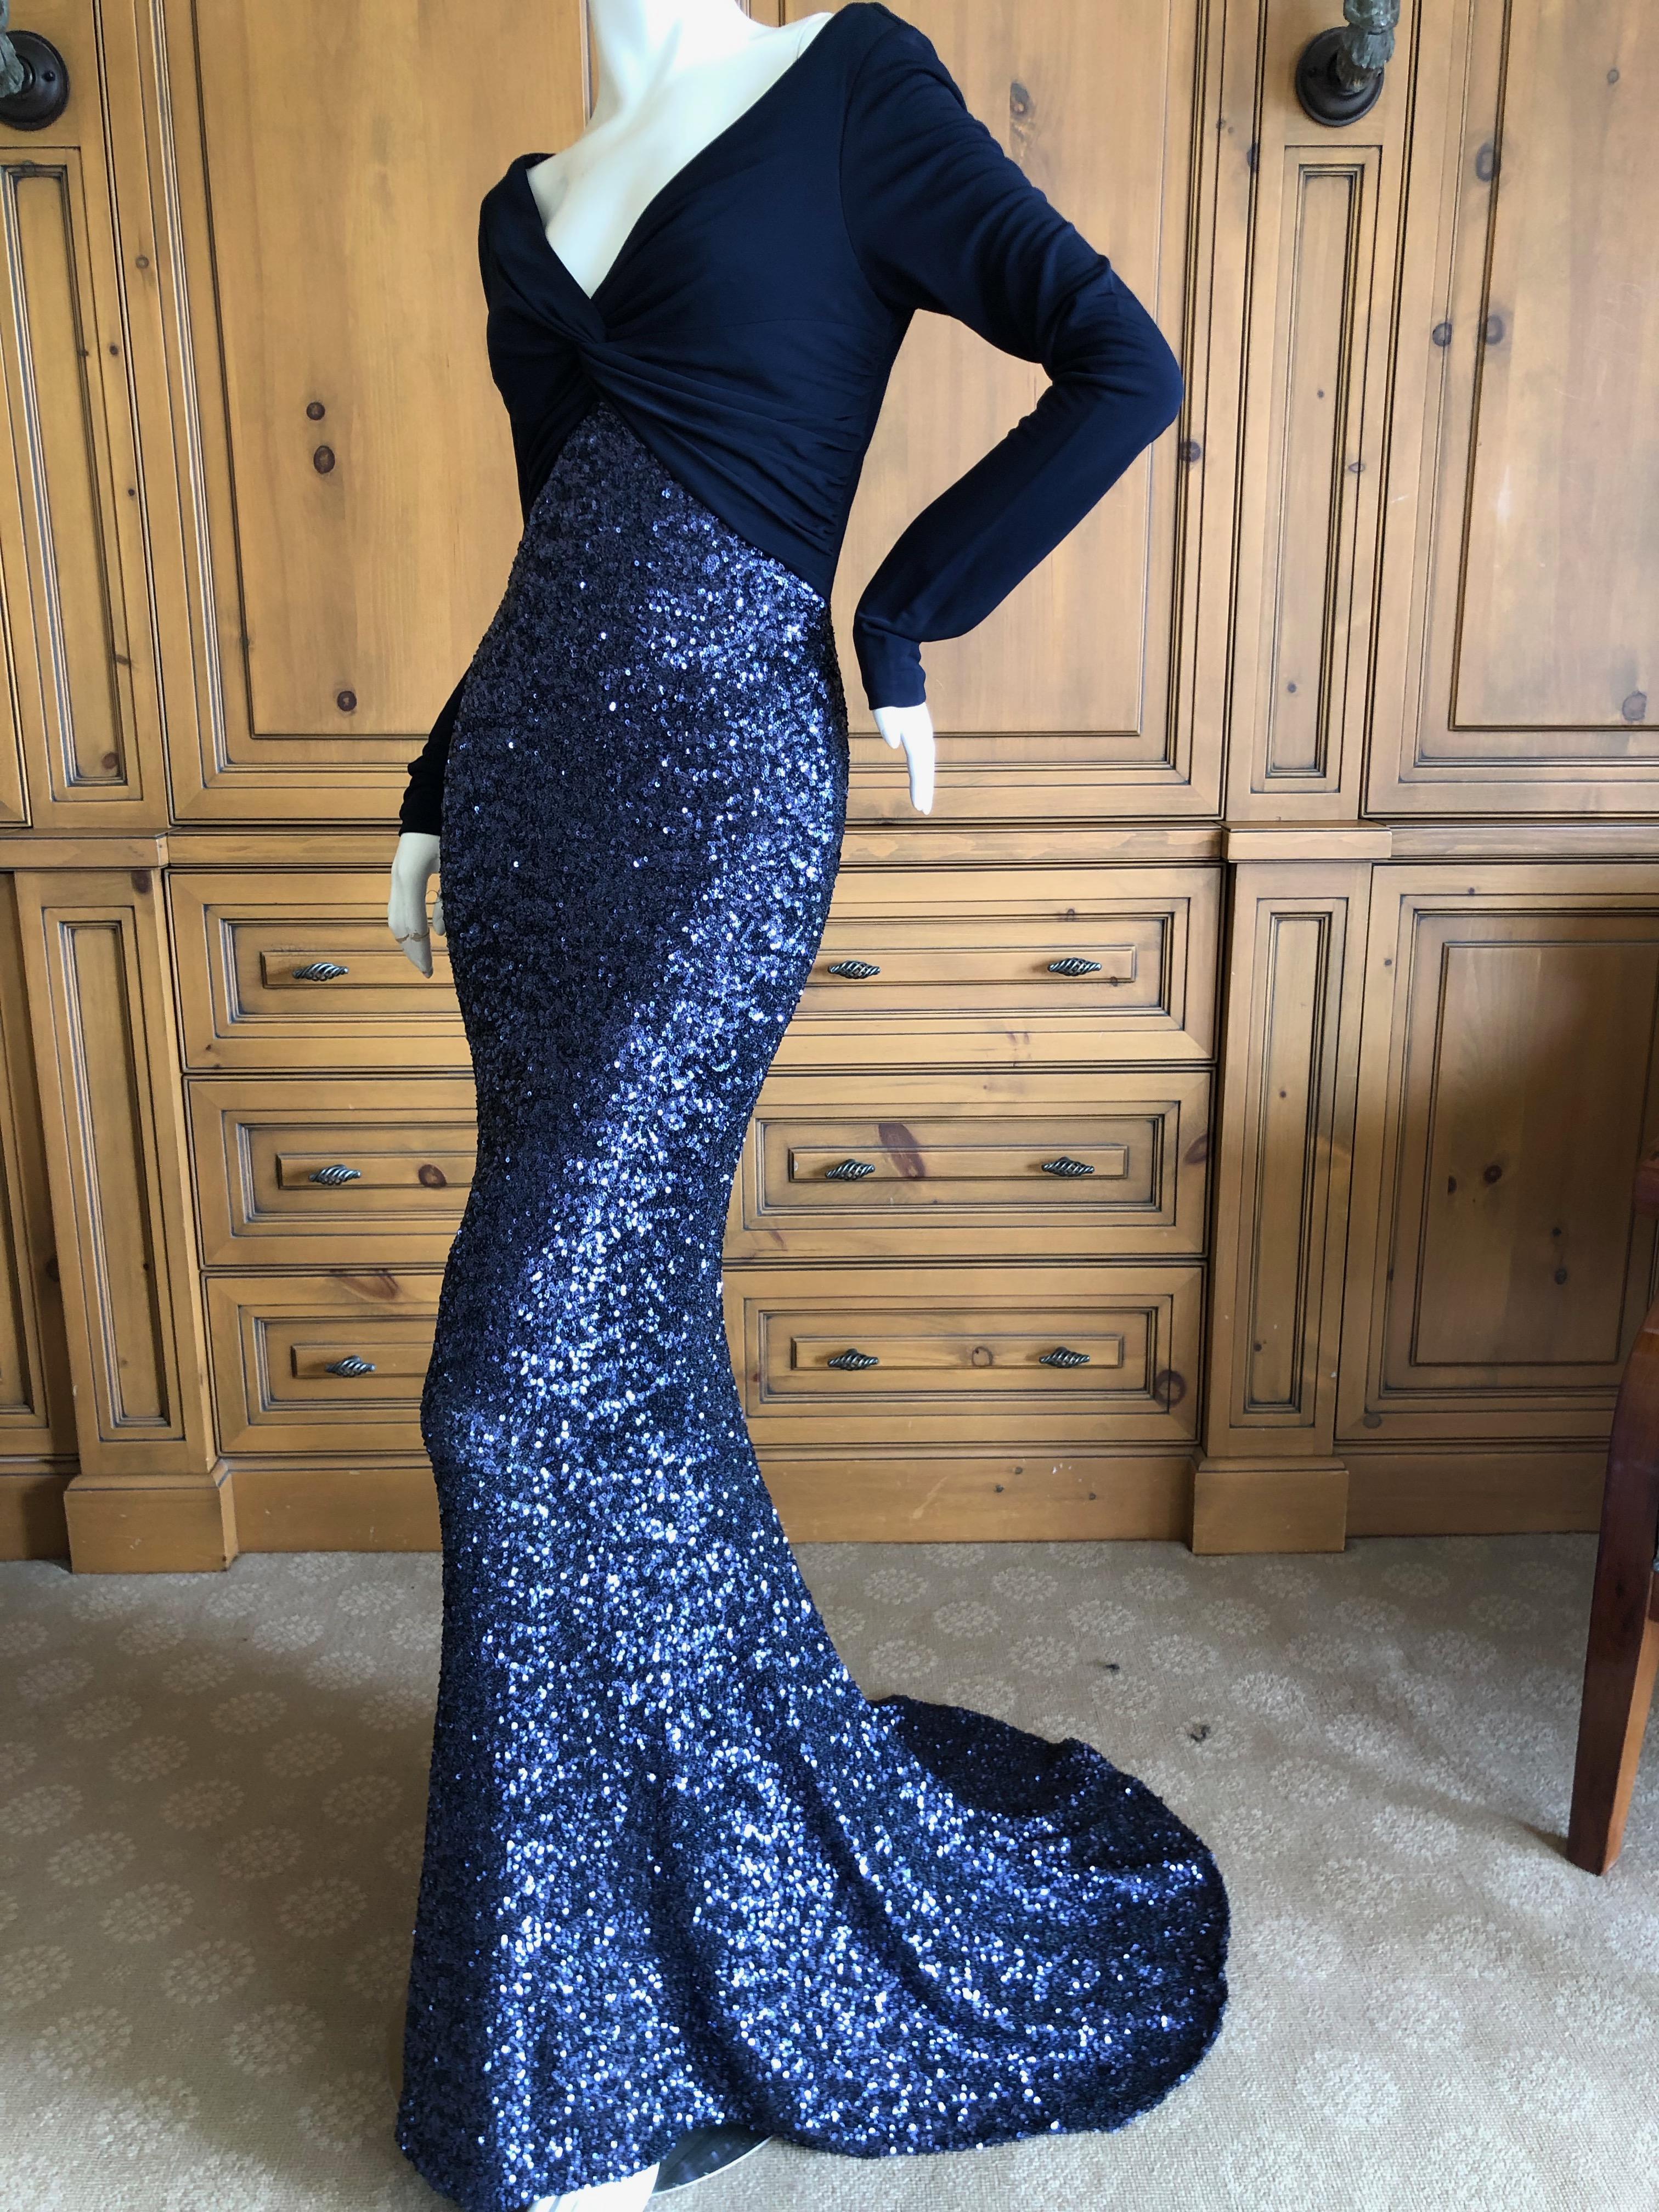 Dolce & Gabbana D&G Navy Blue Low Cut Silk Sequin Evening Gown w Keyhole Back 42 For Sale 1